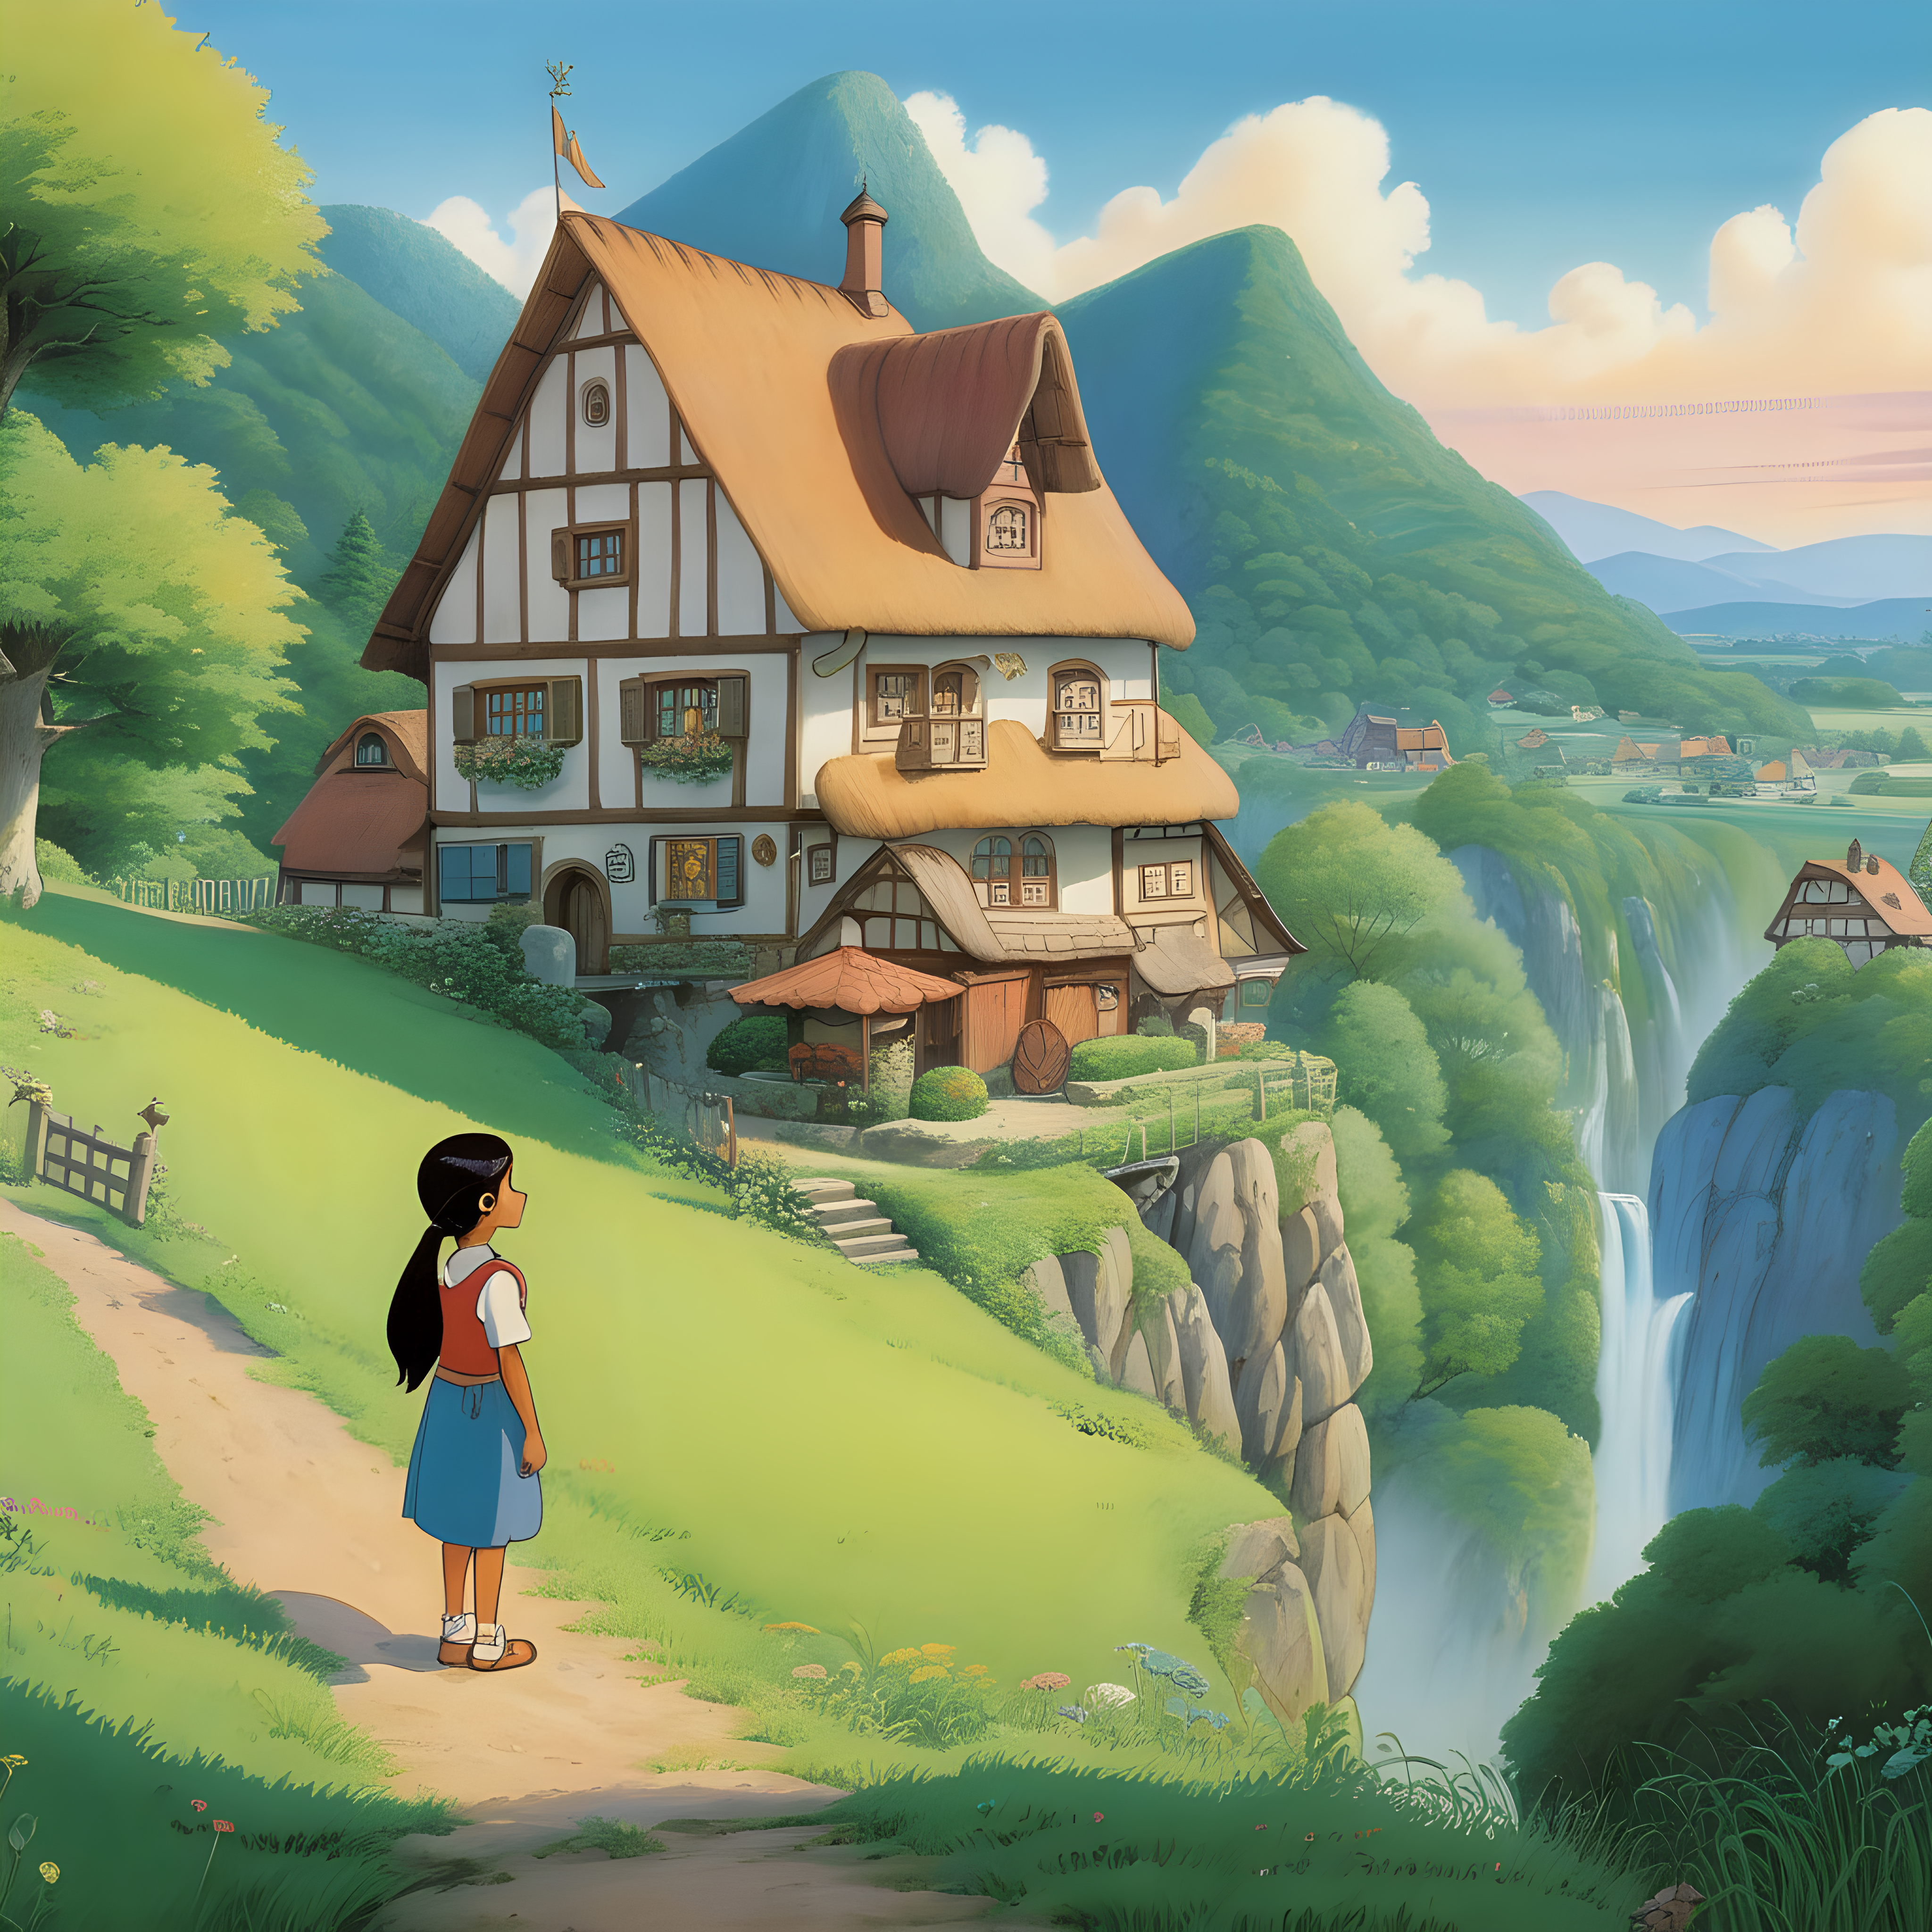 A fairy tale landscape of a young Indian girl living in Germany, Hayao Miyazaki style